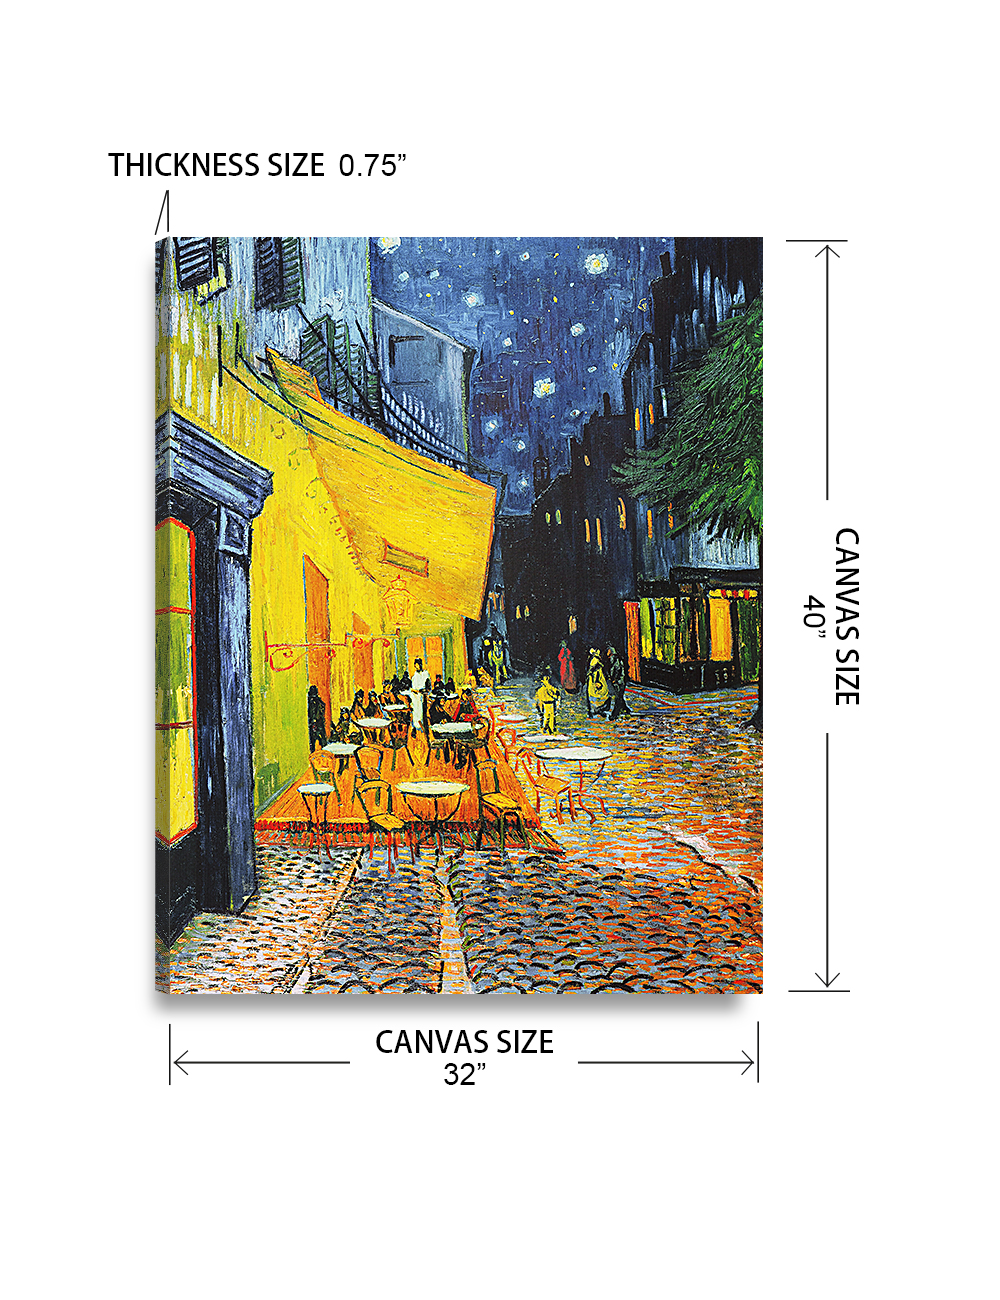 DECORARTS Cafe Terrace At Night. Vincent Van Gogh Art Reproduction. Giclee  Print on Canvas. Wall Art for Home. 40x32